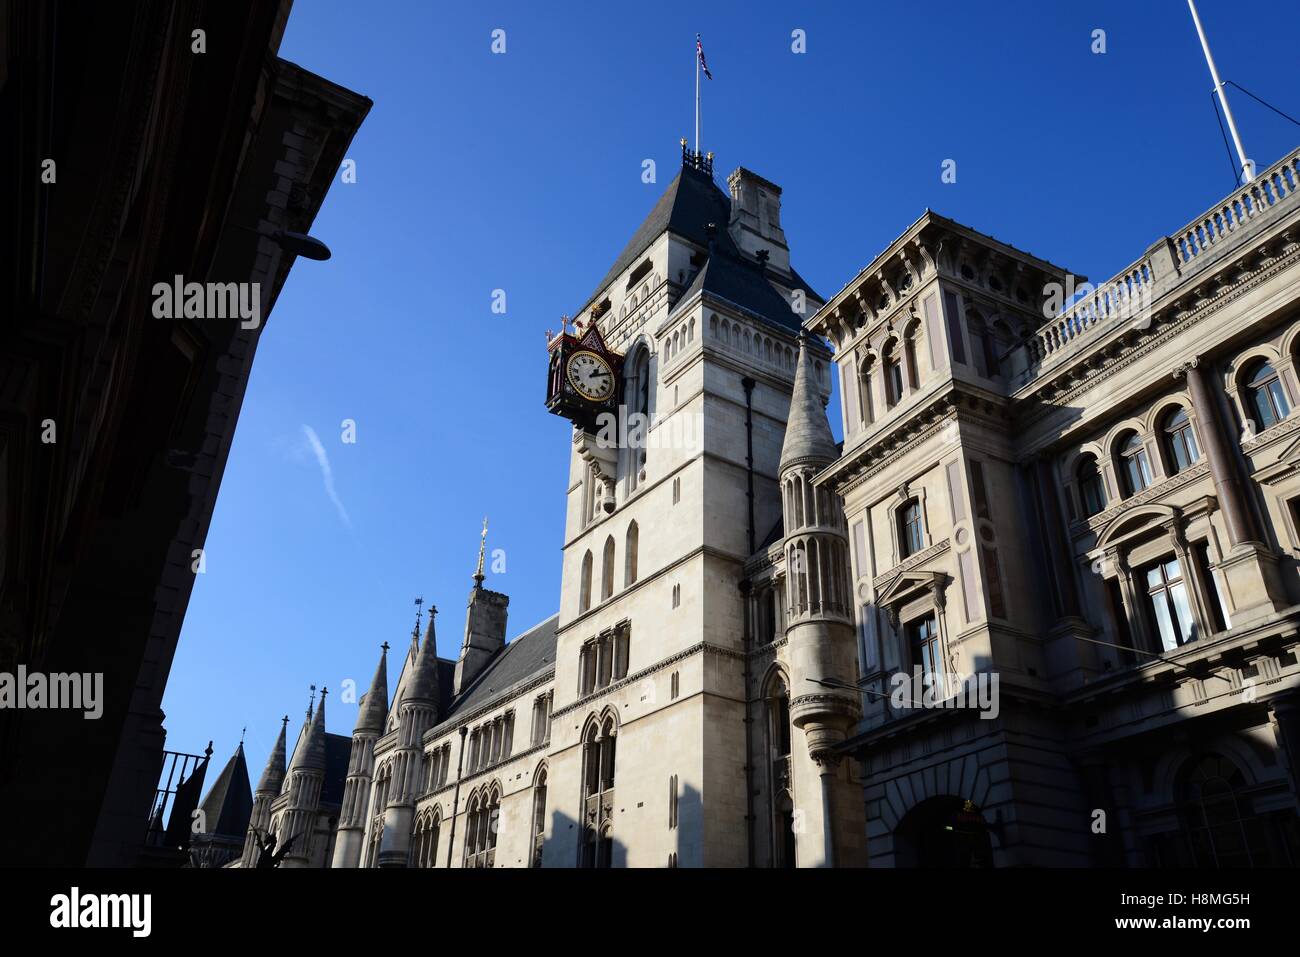 Royal Courts of Justice, Fleet Street/The Strand, London, England, UK Stock Photo